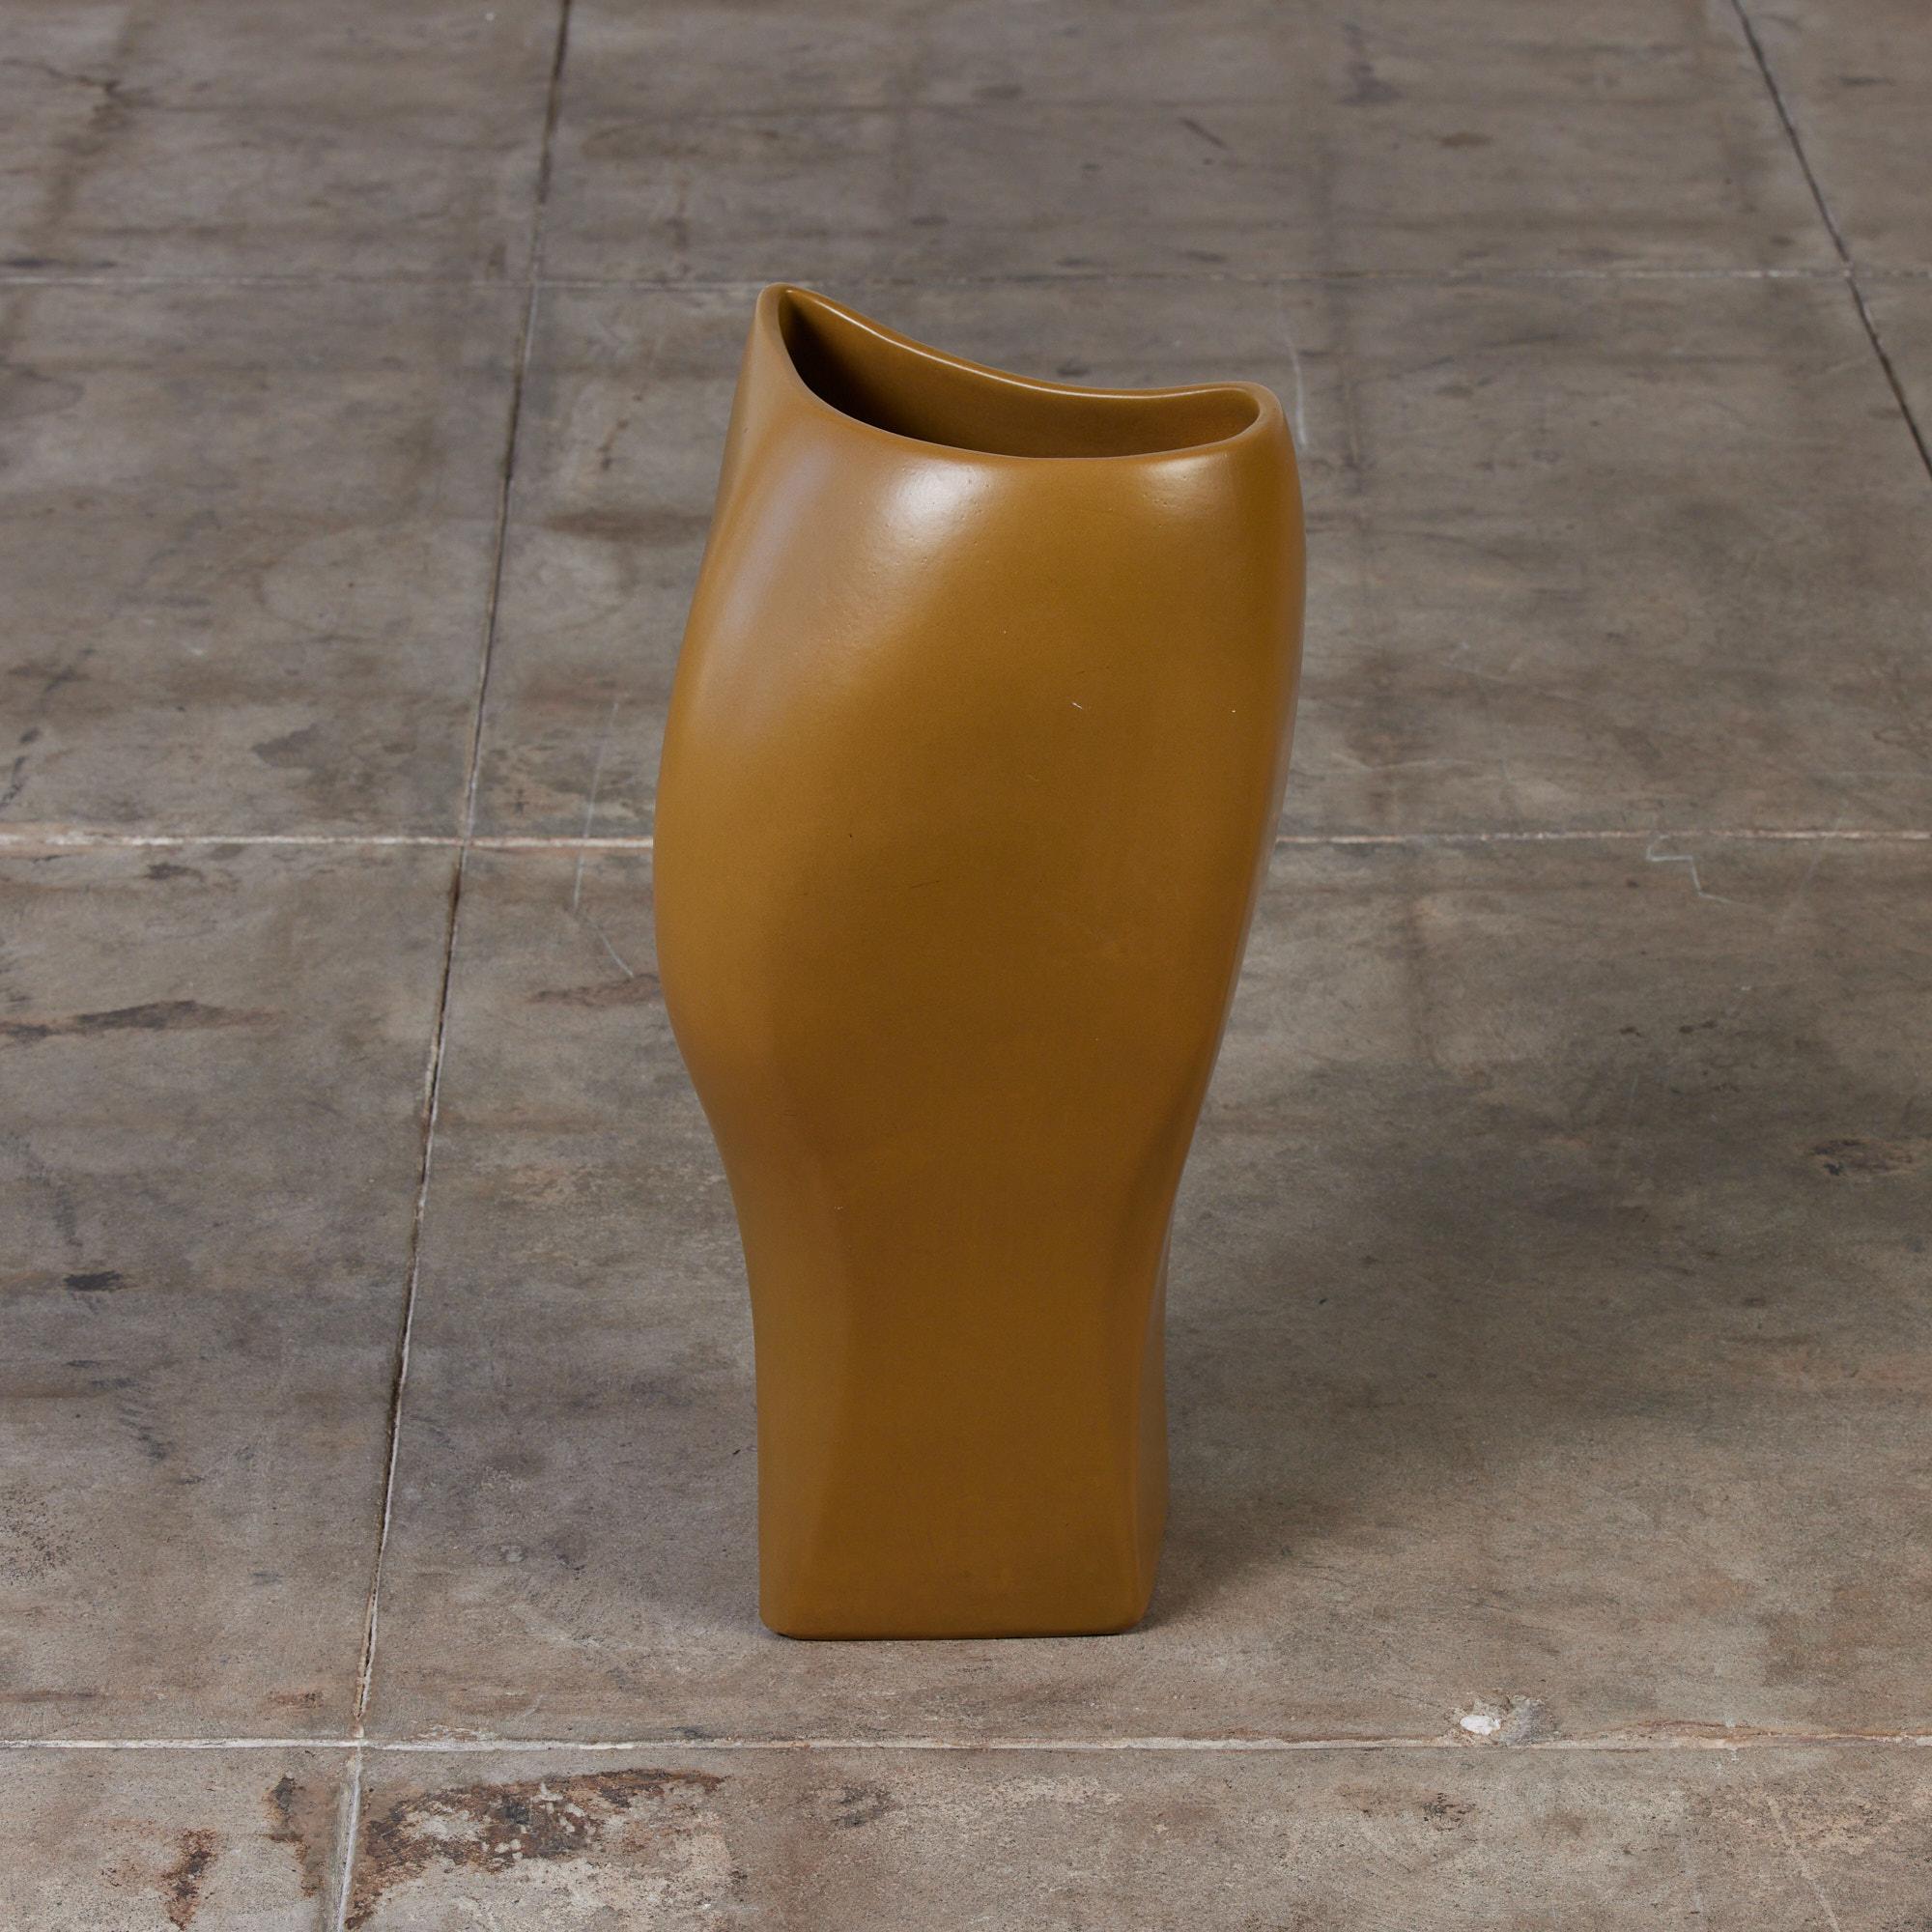 Clay David Cressey Sculptural Planter for Architectural Pottery